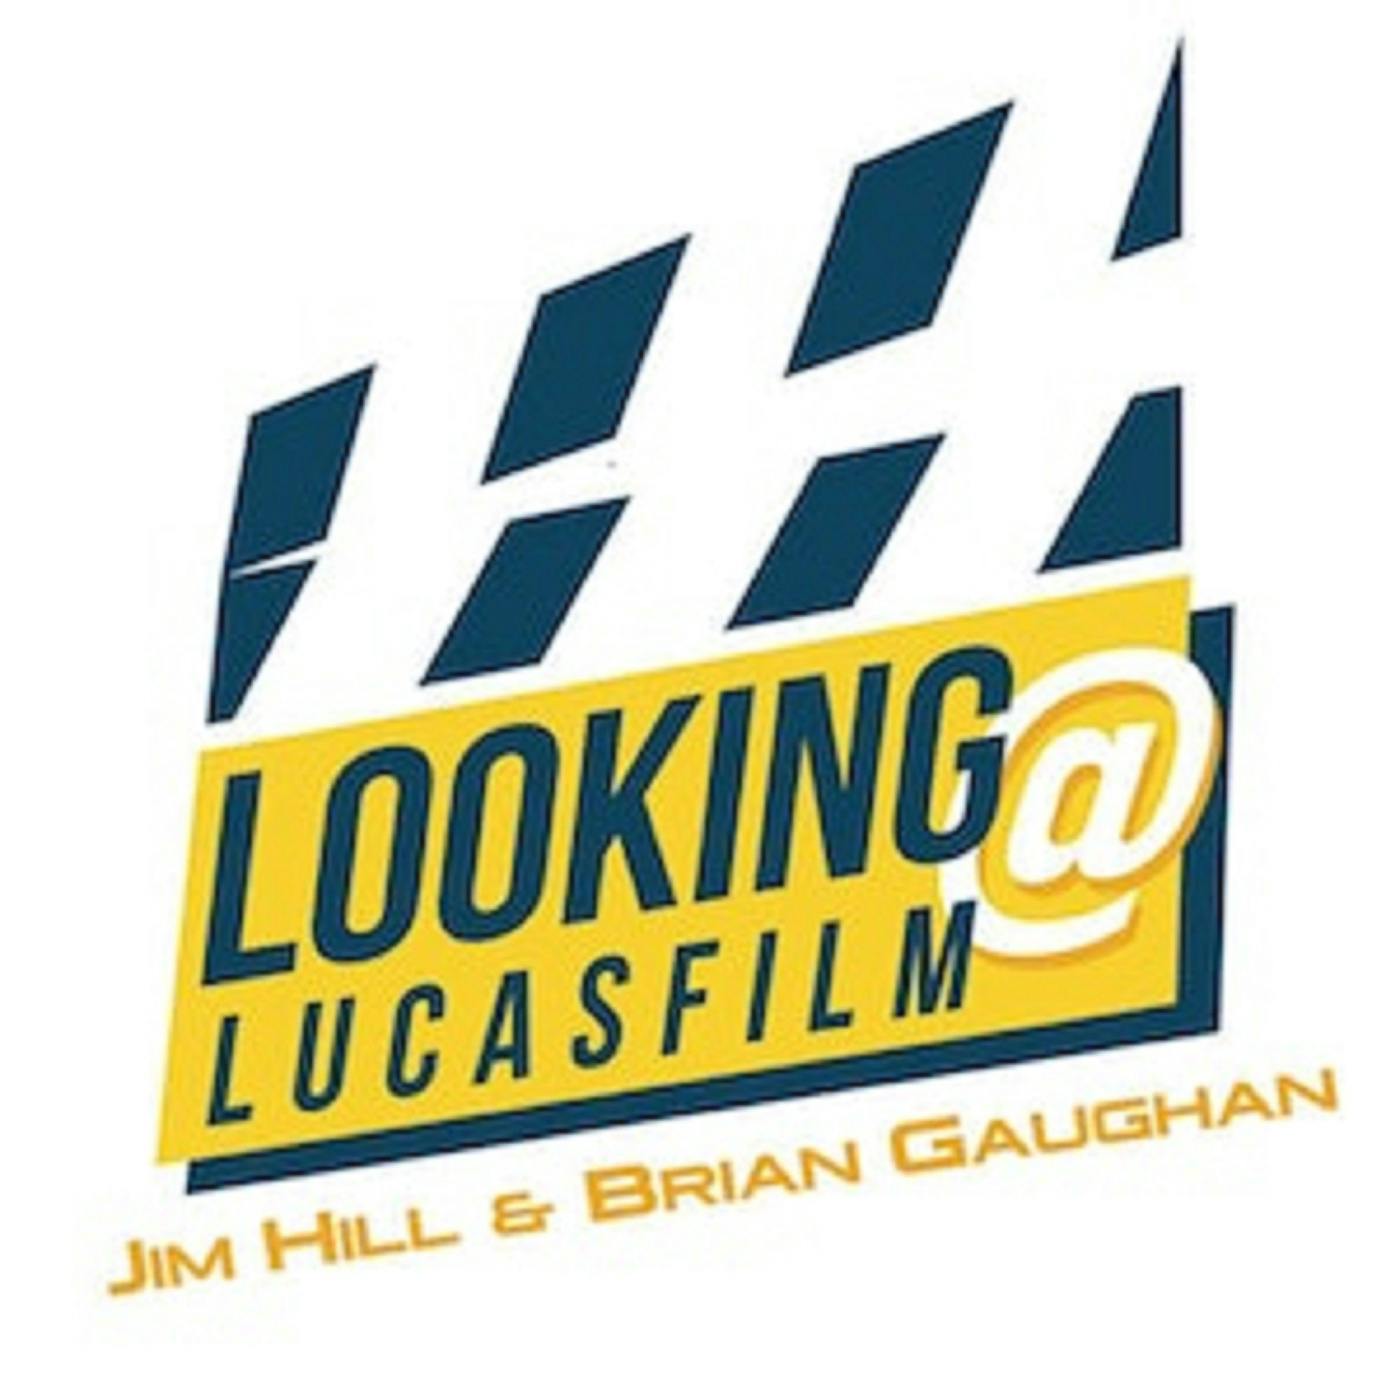 Looking at Lucasfilm with Brian Gaughan - Episode 86:  How Mark Hamill got to voice the Joker on “Batman: The Animated Series”